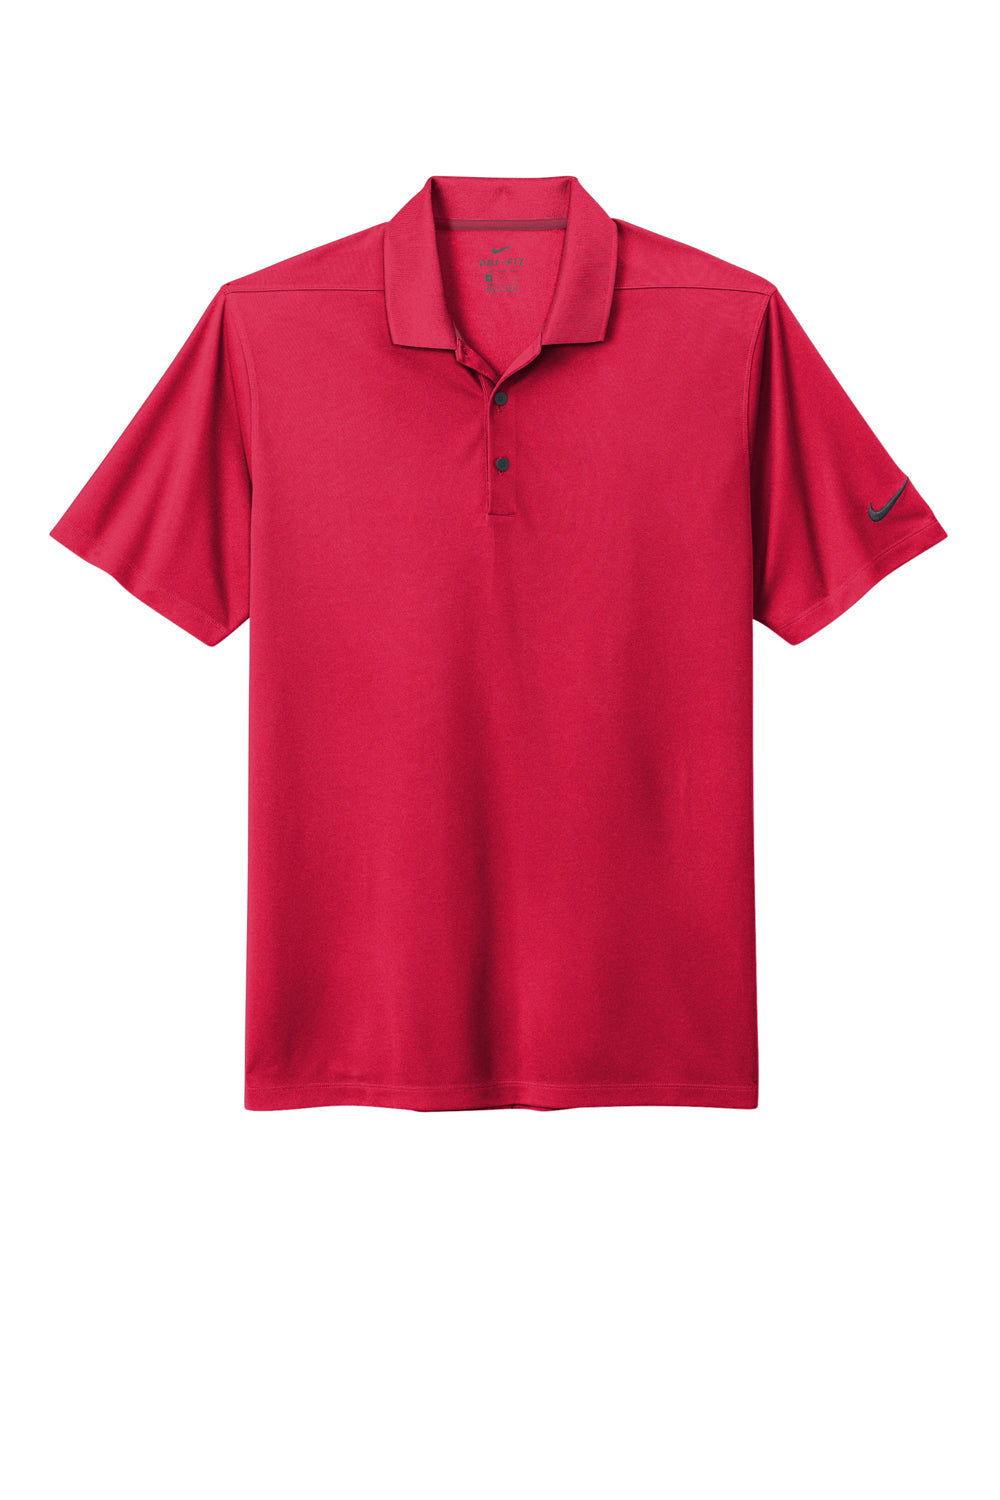 Nike NKDC1963 Mens Dri-Fit Moisture Wicking Micro Pique 2.0 Short Sleeve Polo Shirt University Red Flat Front